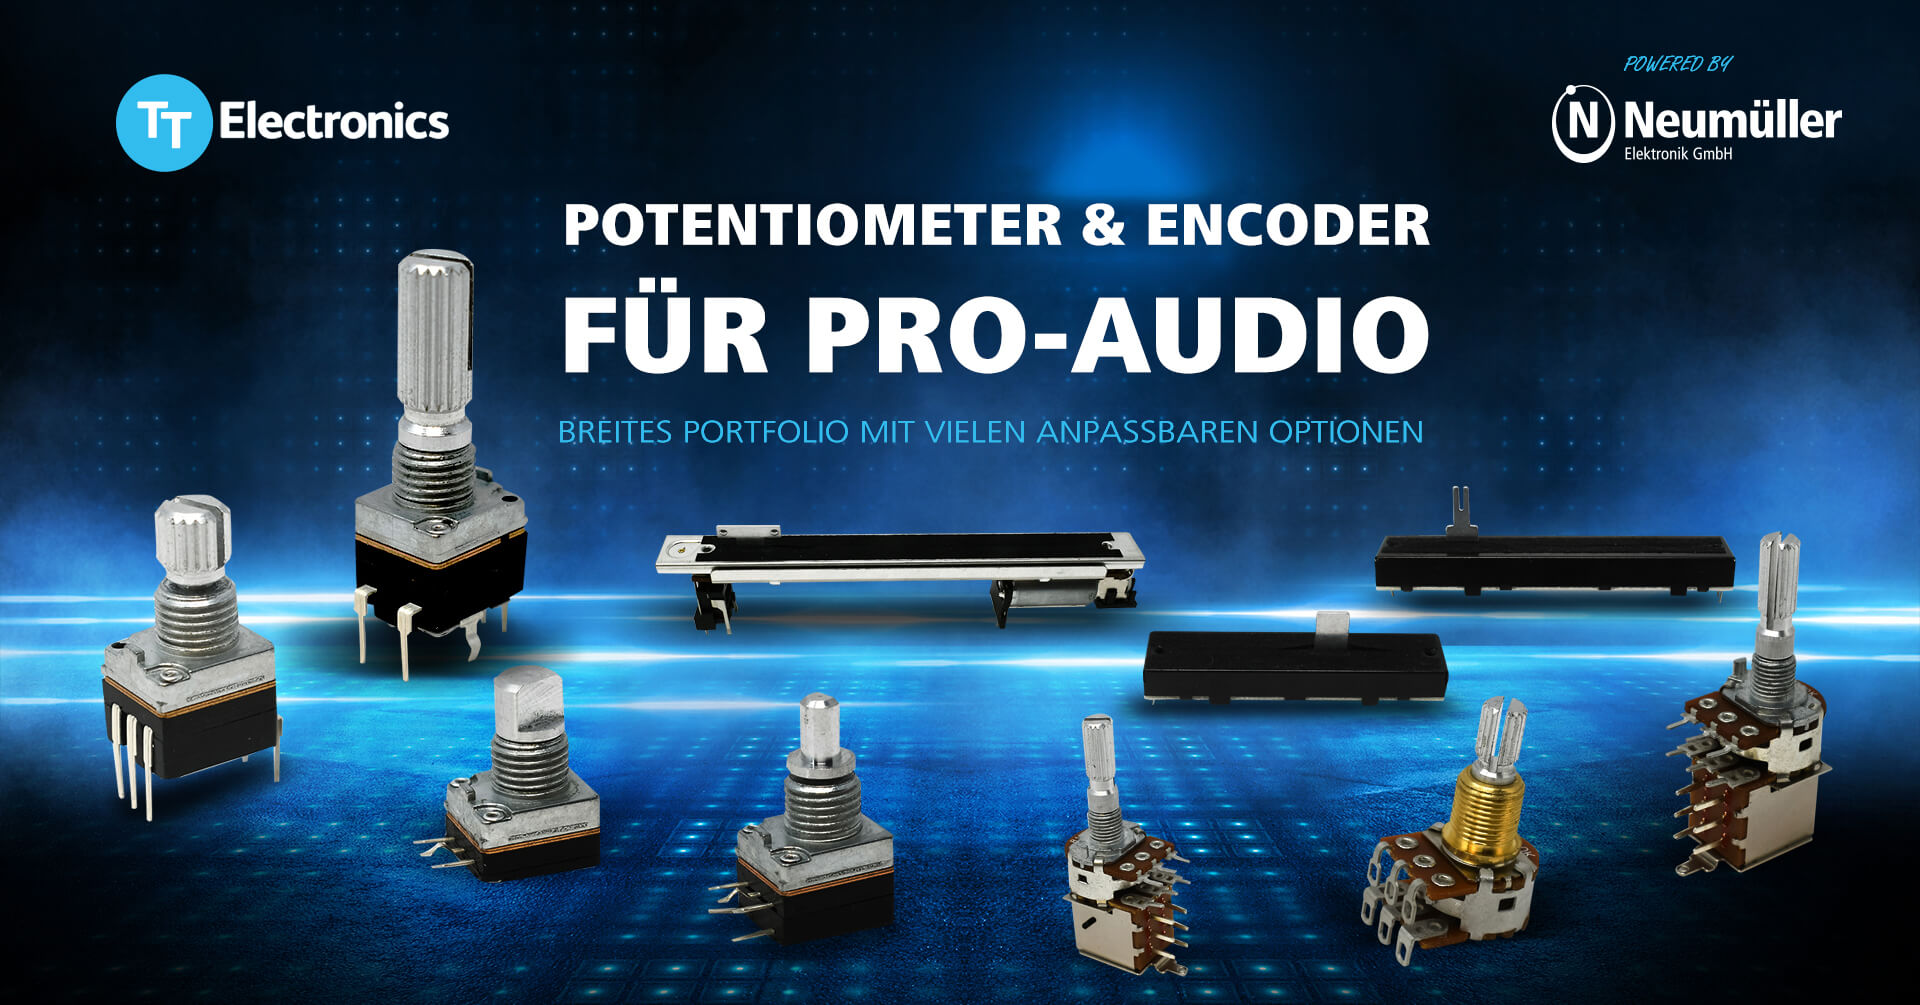 Potentiometer and encoder for professional audio technology